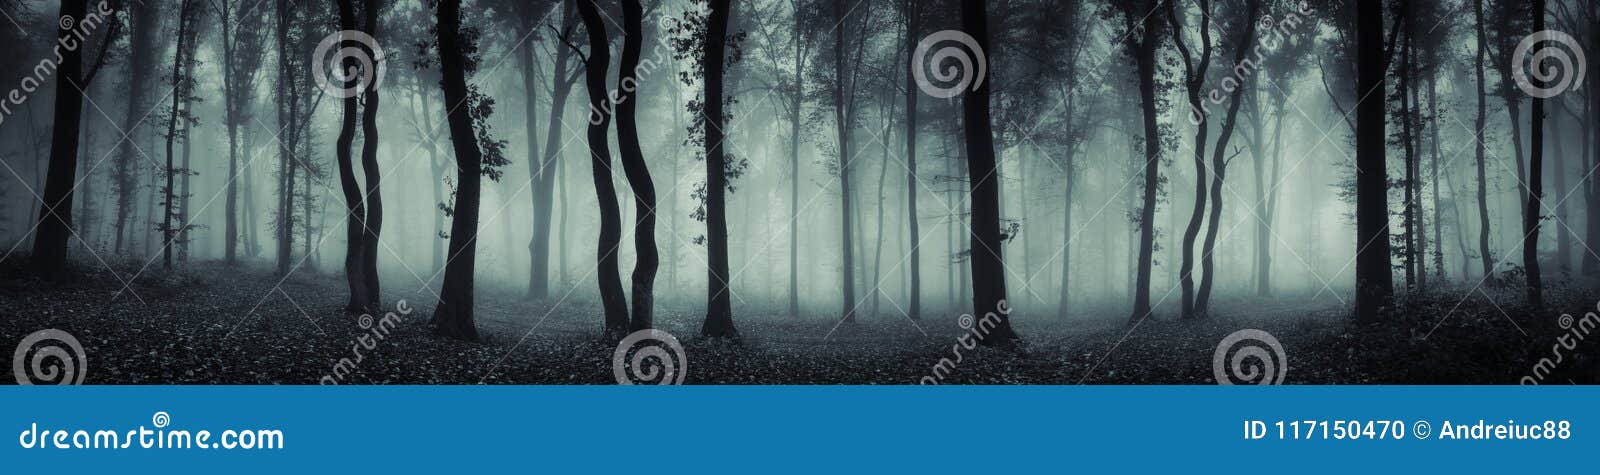 mysterious forest scene panorama